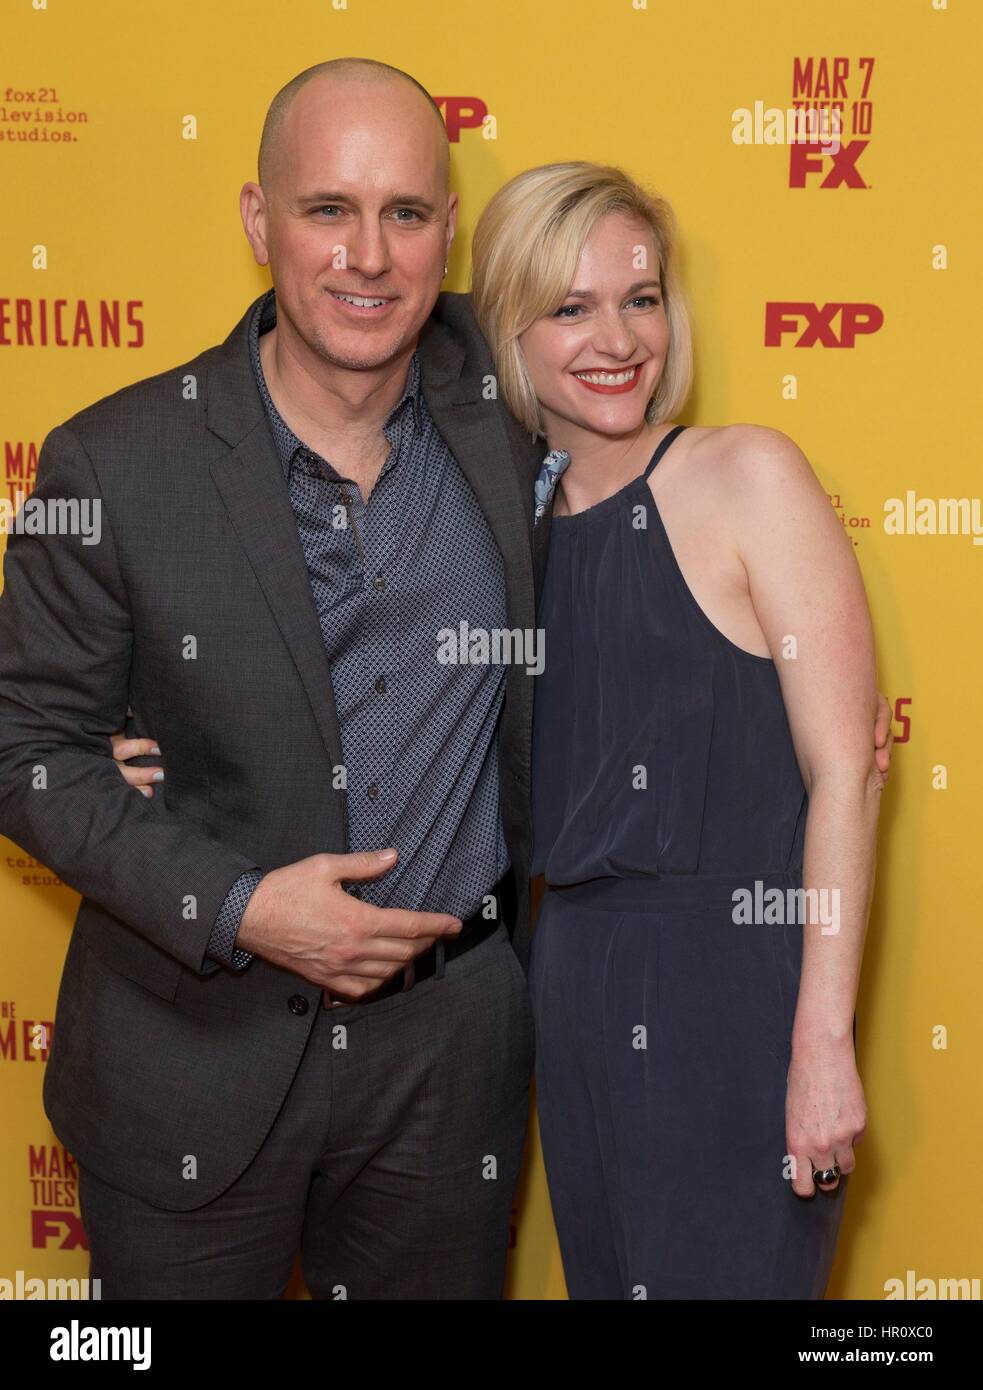 New York, NY, USA. 25th Feb, 2017. Kelly AuCoin, Suzy Jane Hunt at arrivals for THE AMERICANS Season Five Premiere, Directors Guild of America (DGA) Theater, New York, NY February 25, 2017. Credit: Lev Radin/Everett Collection/Alamy Live News Stock Photo